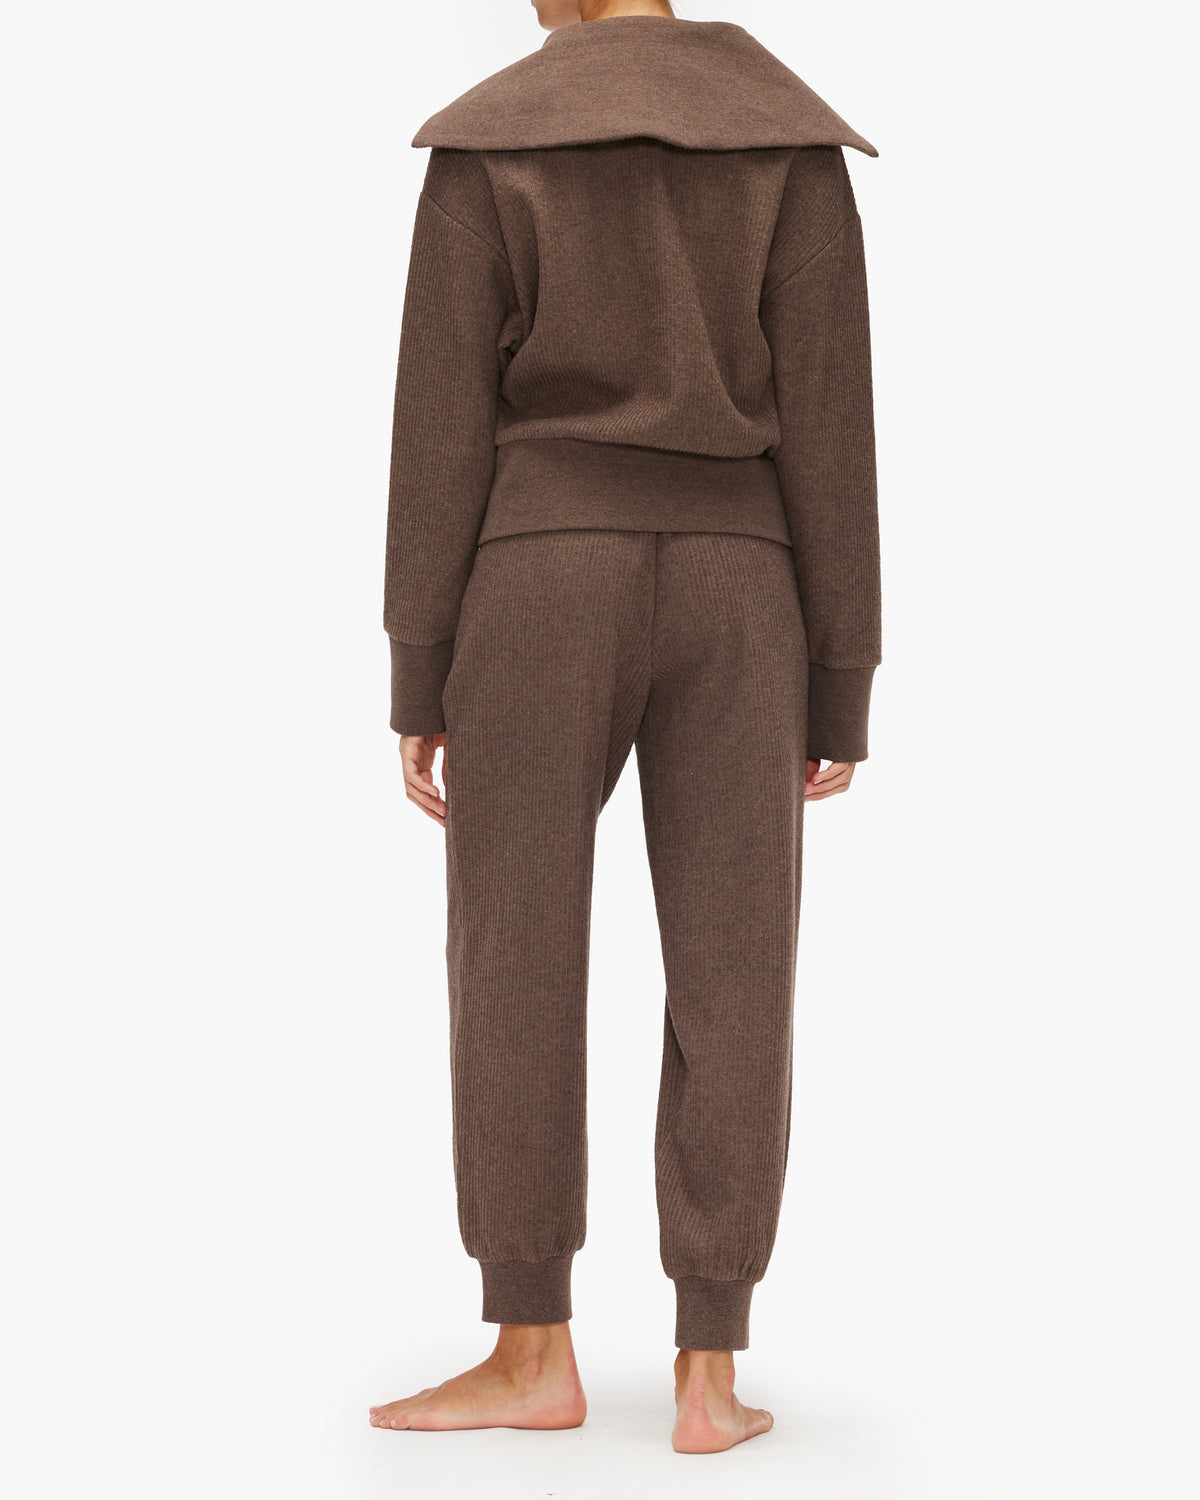 Alo Yoga Muse Hoodie – The Shop at Equinox